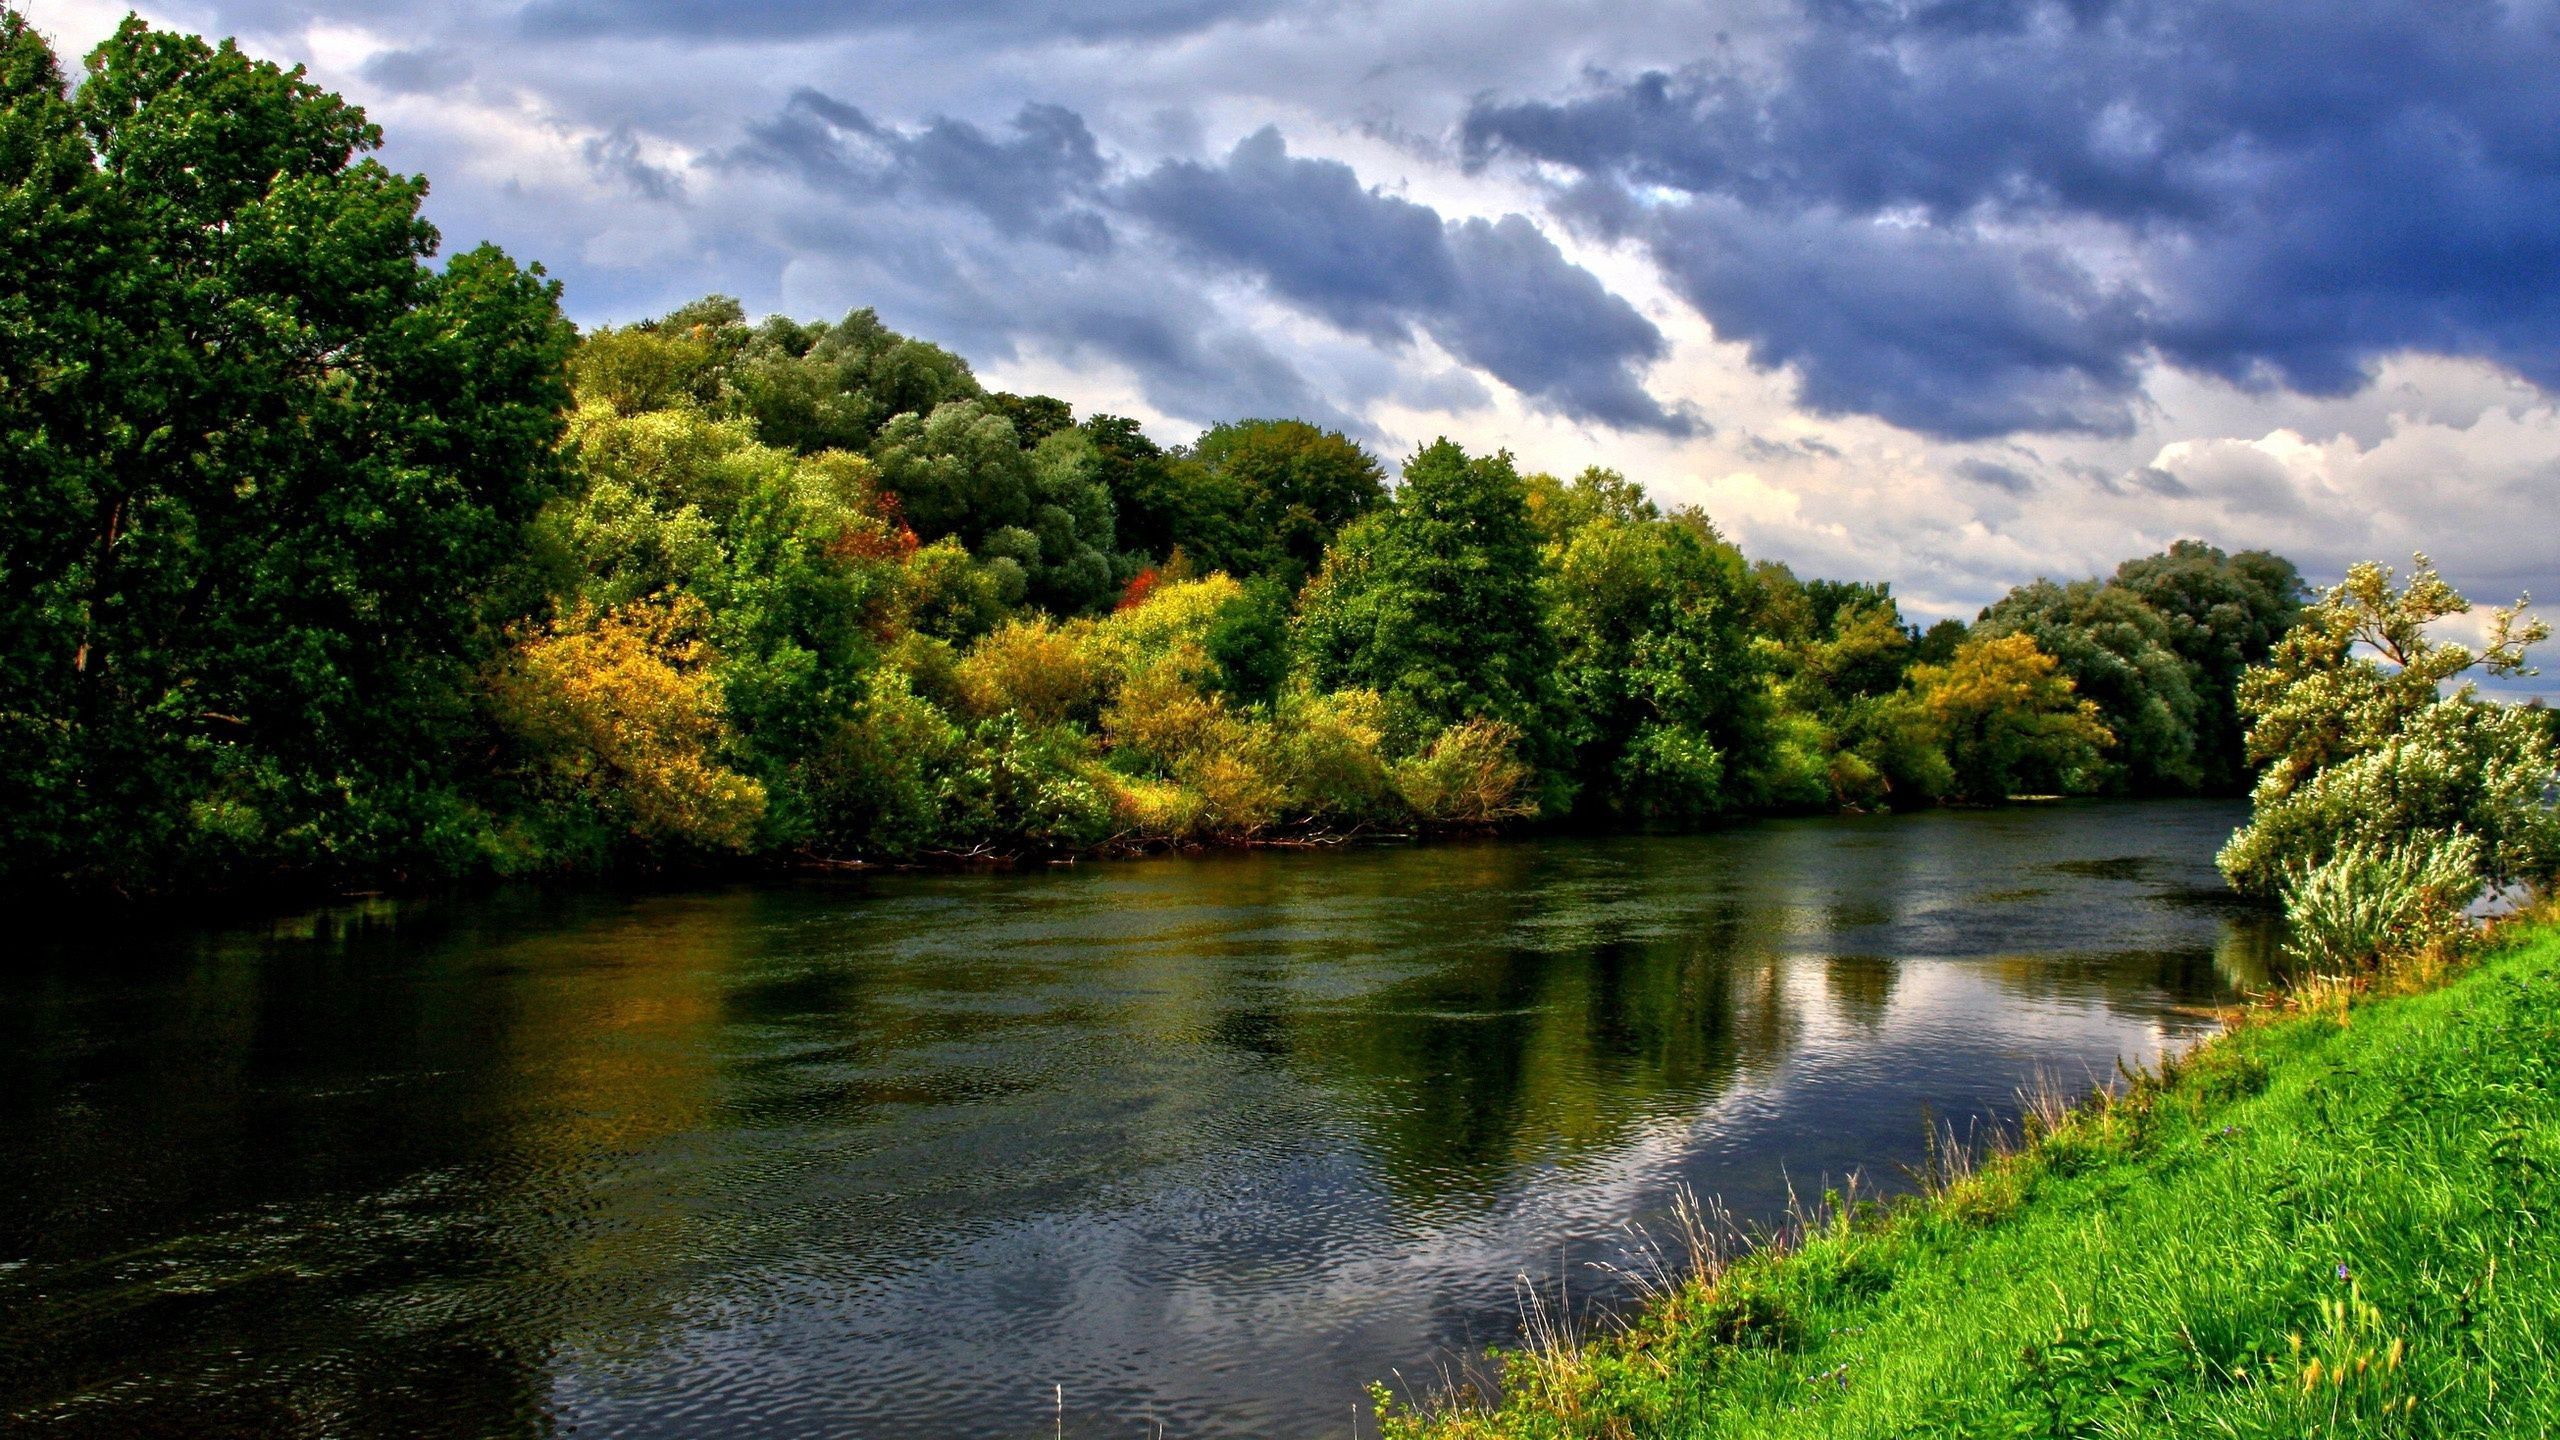 trees, rivers, nature, summer, greens 1080p